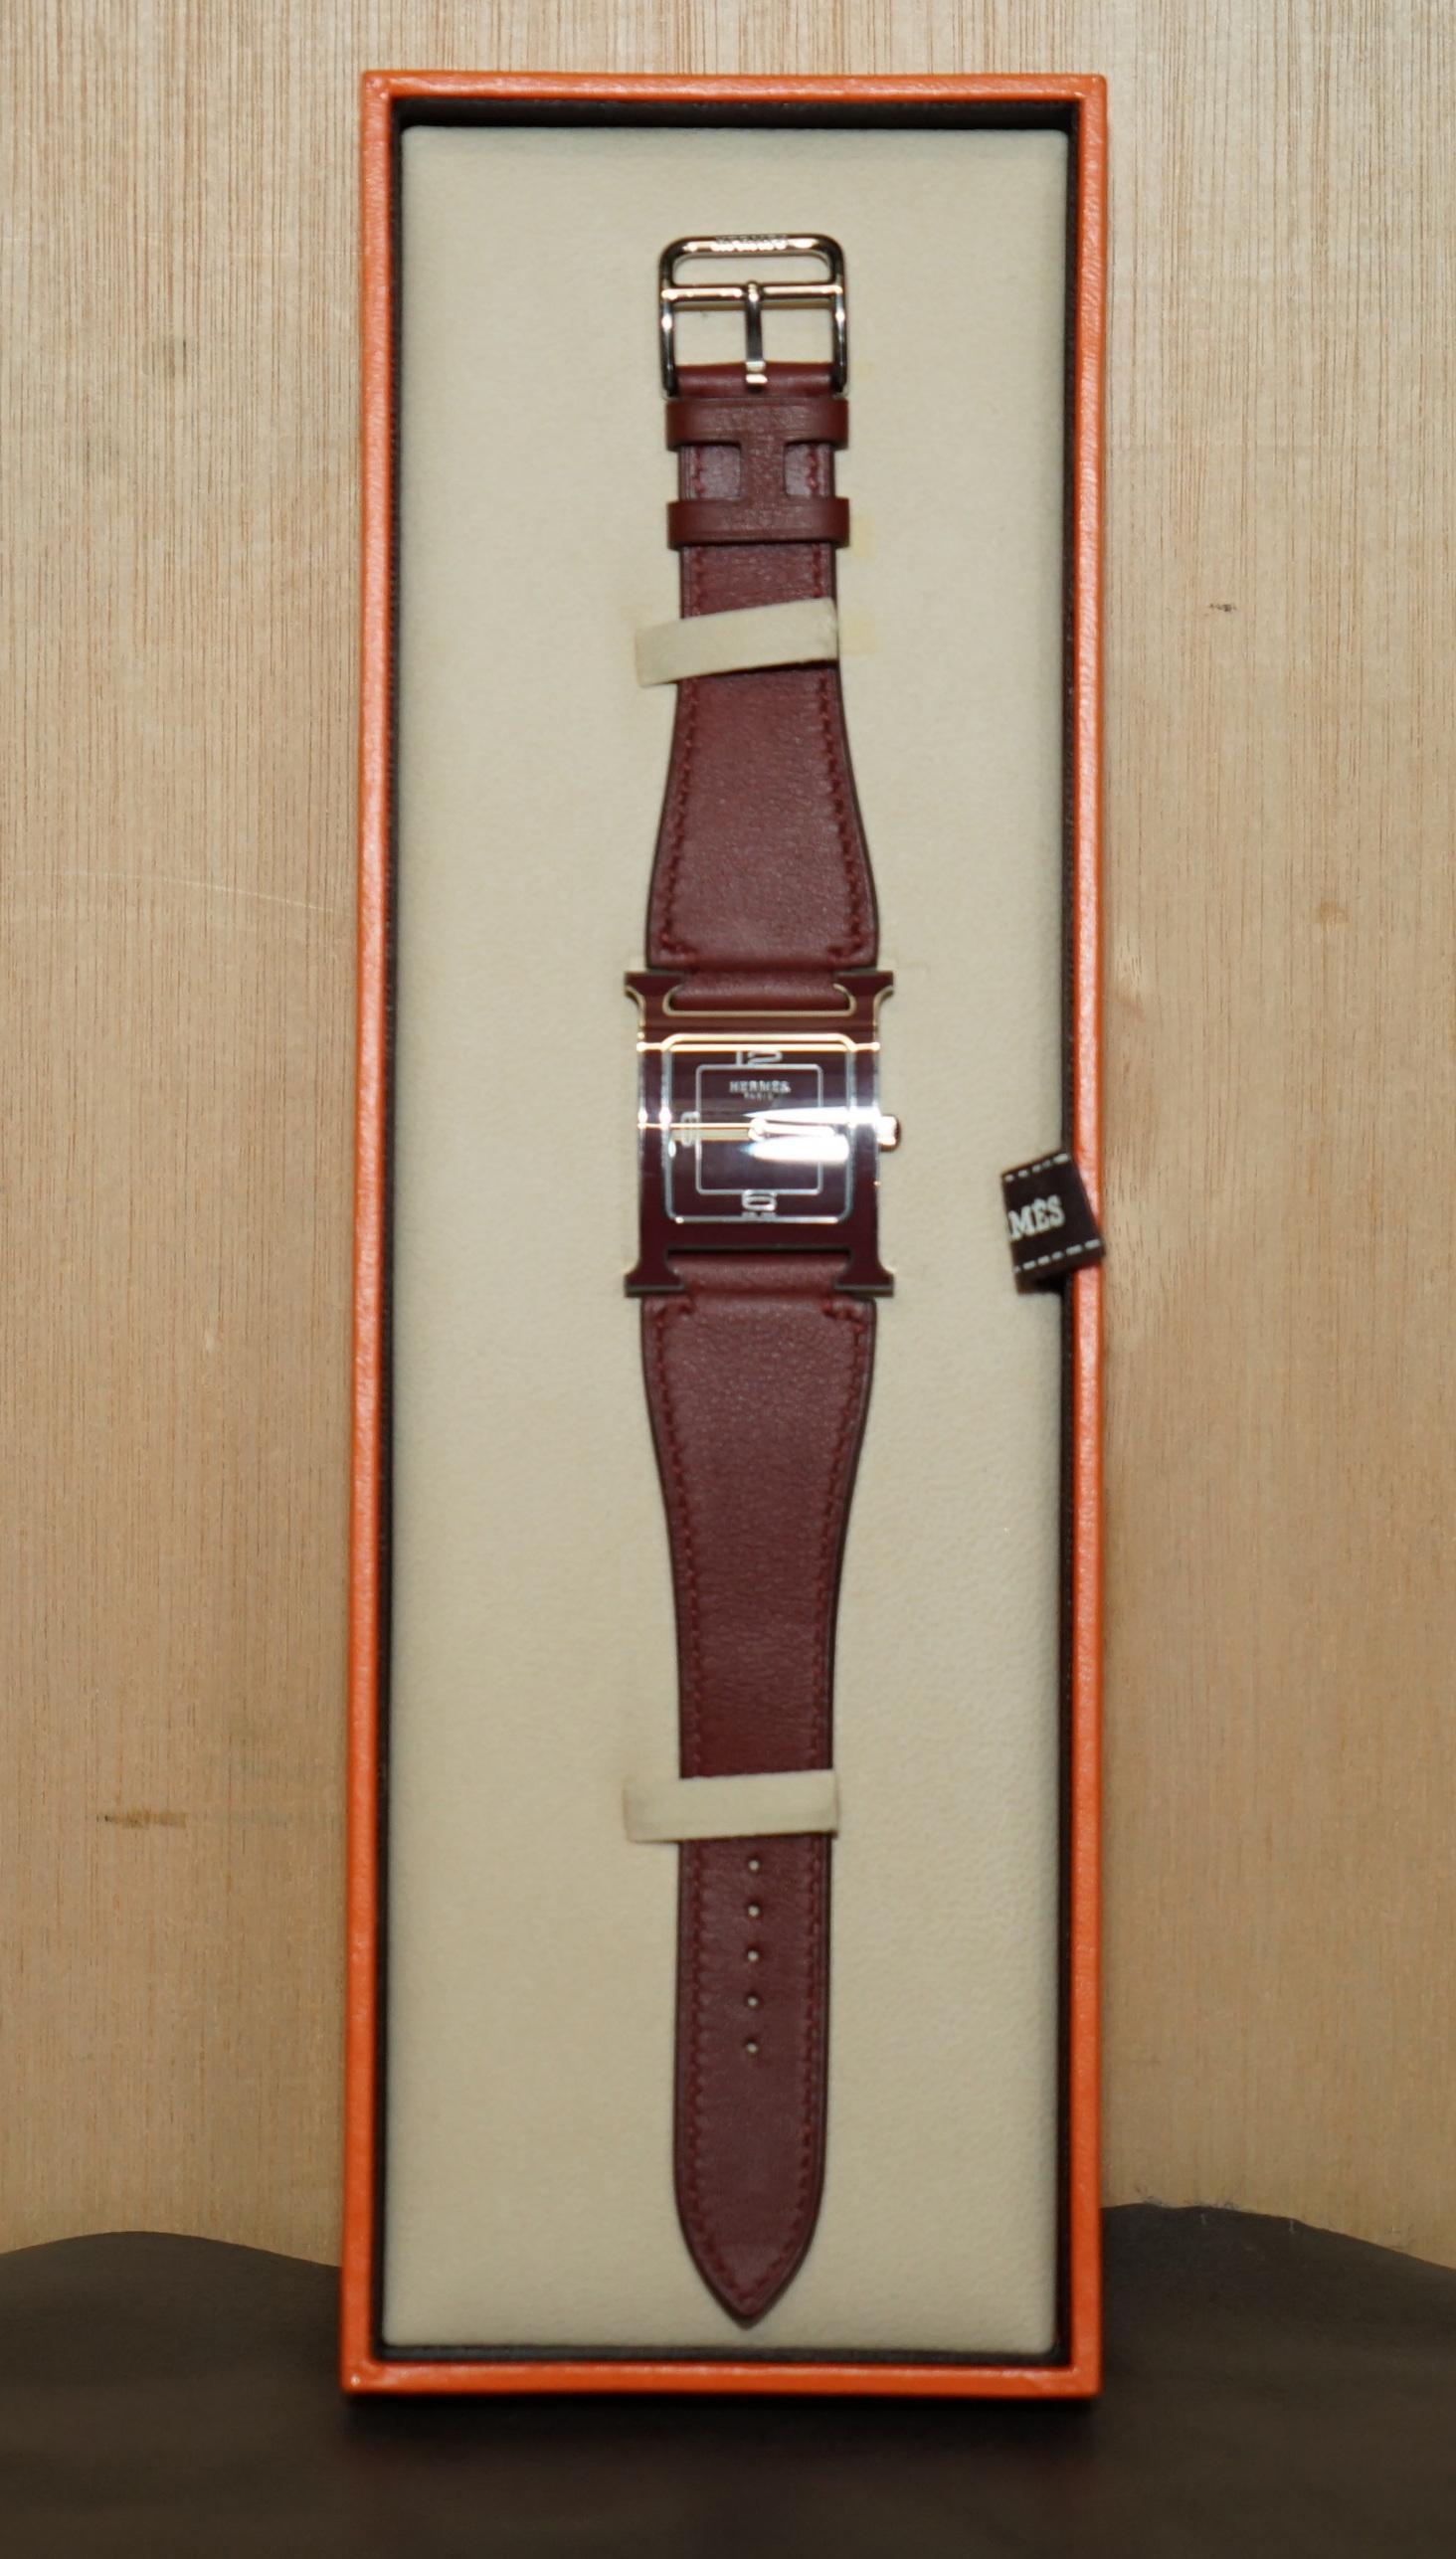 Women's or Men's BRAND NEW IN THE ORIGiNAL BOX WITH PAPERWORK HERMES PARIS LTD EDITION H WATCH For Sale